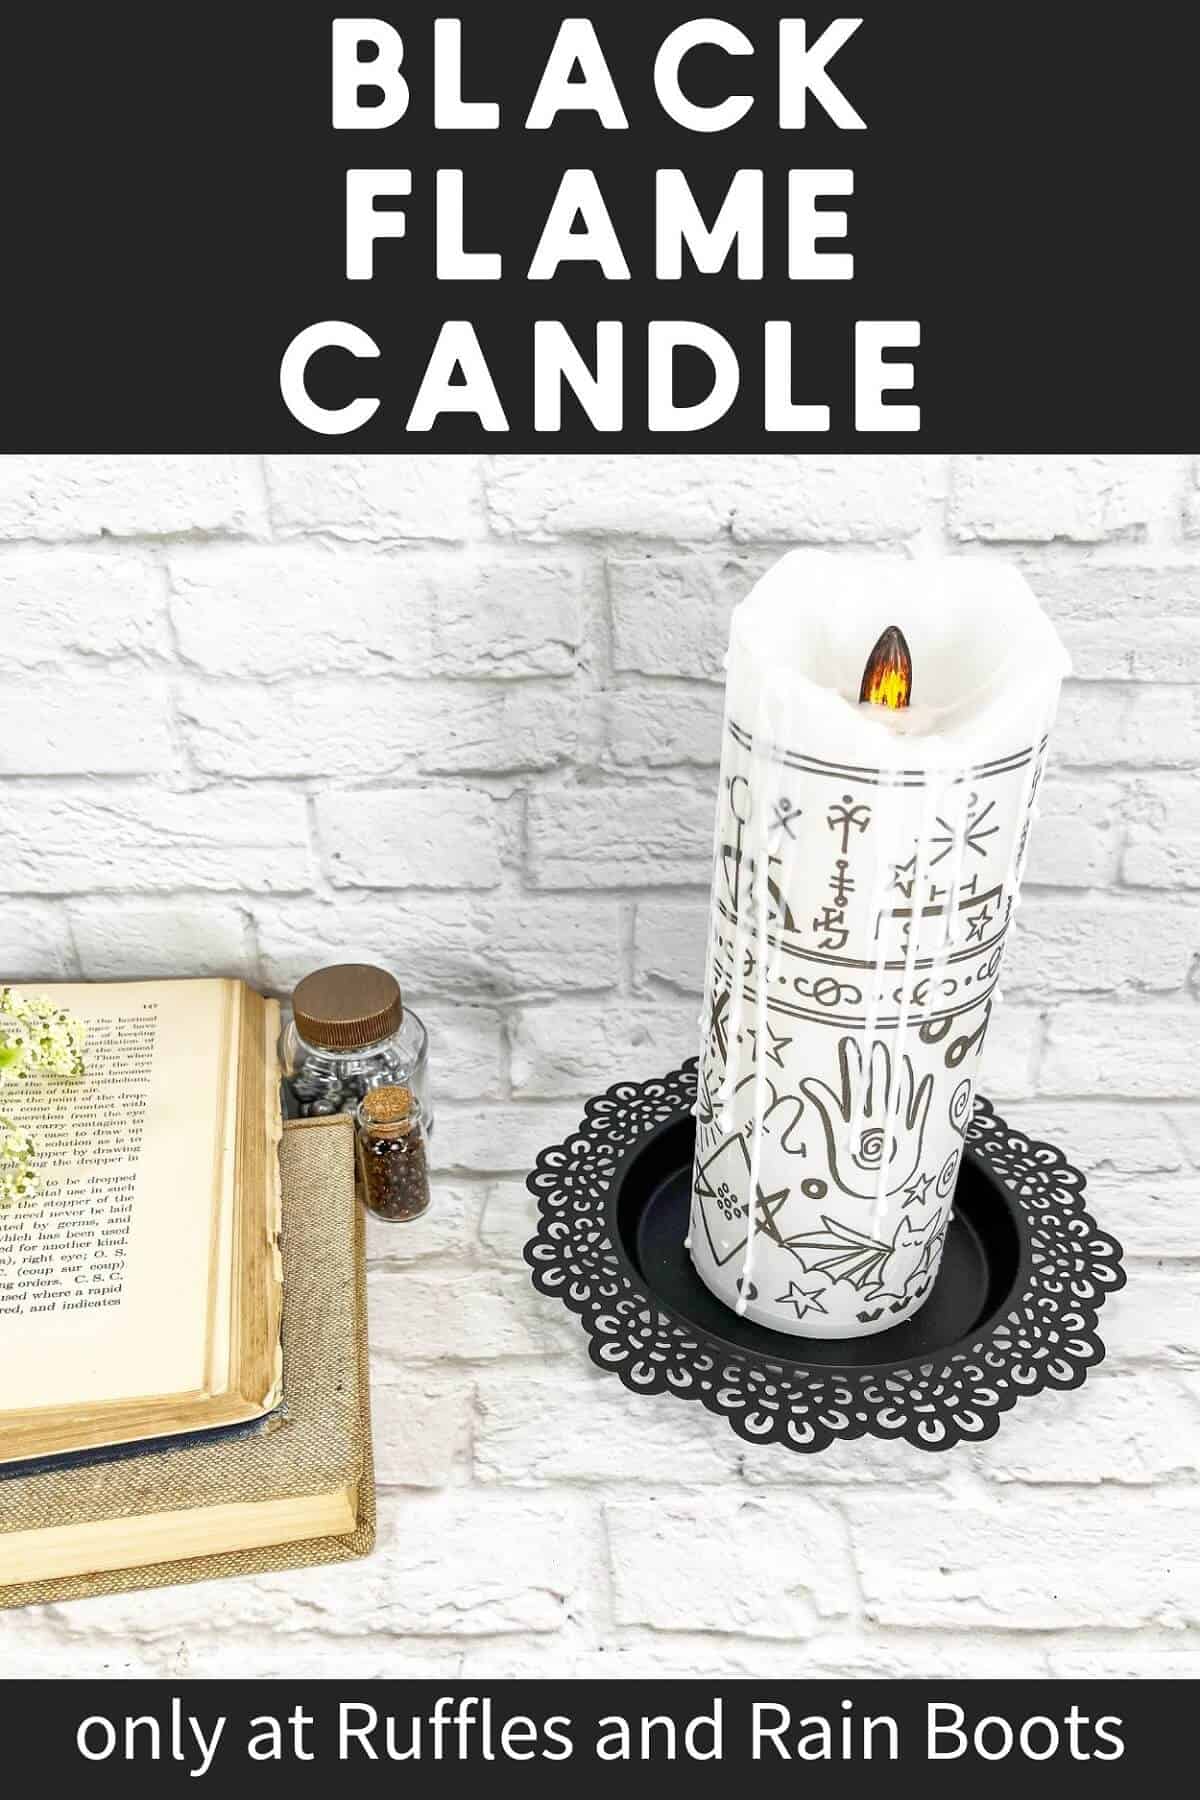 A vertical image of a Hocus Pocus Black Flame Candle, next to a few potion bottles and books against a white brick background.